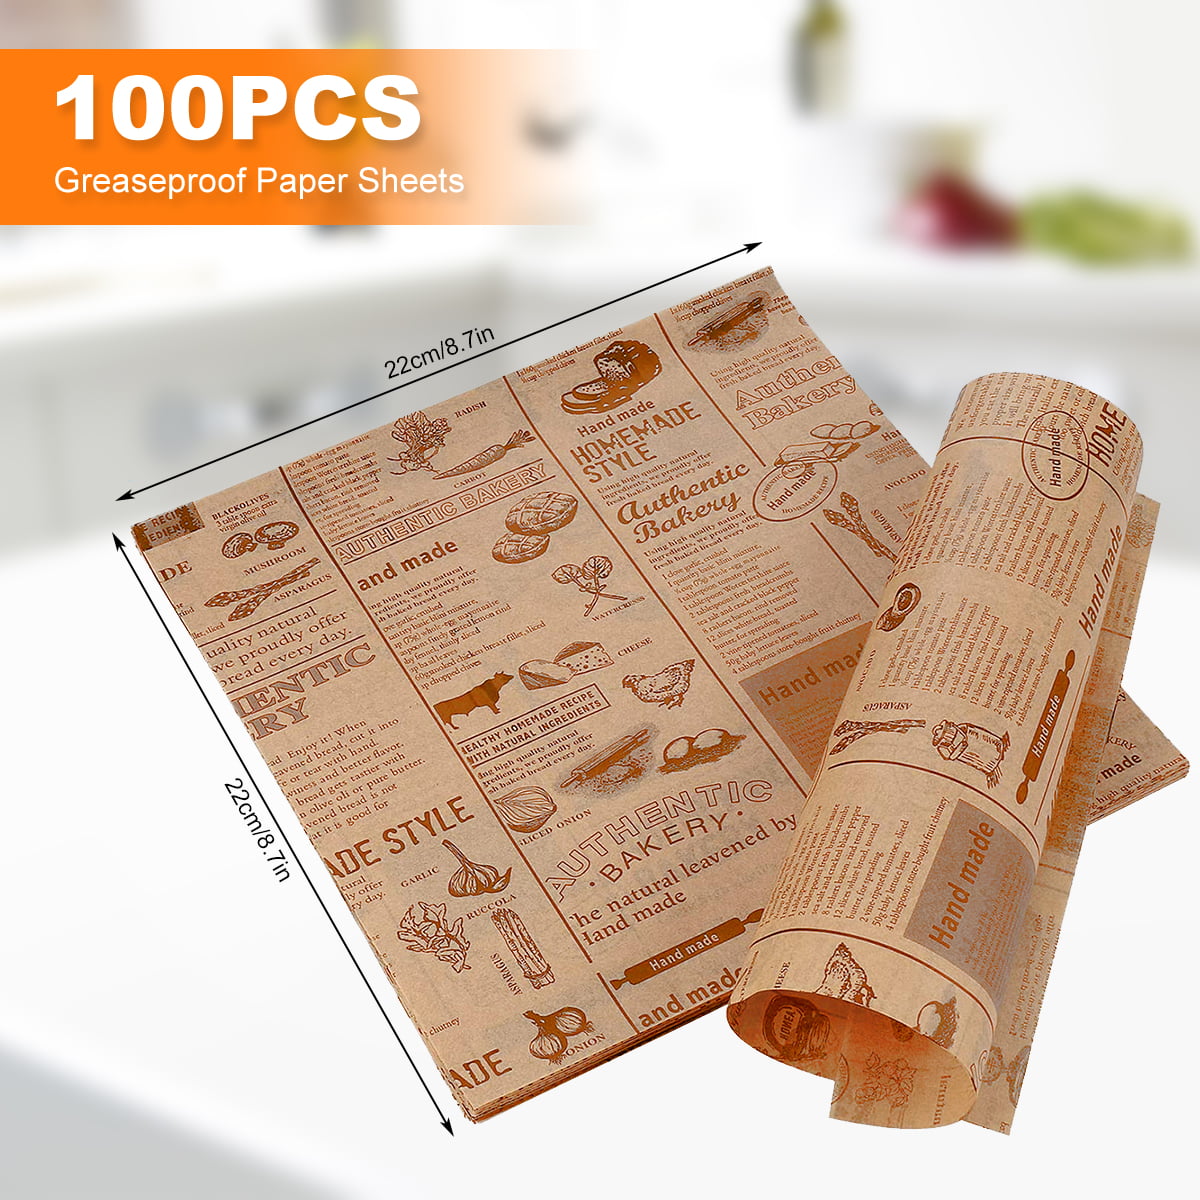 Greaseproof paper vs baking paper – What You Need To Know!